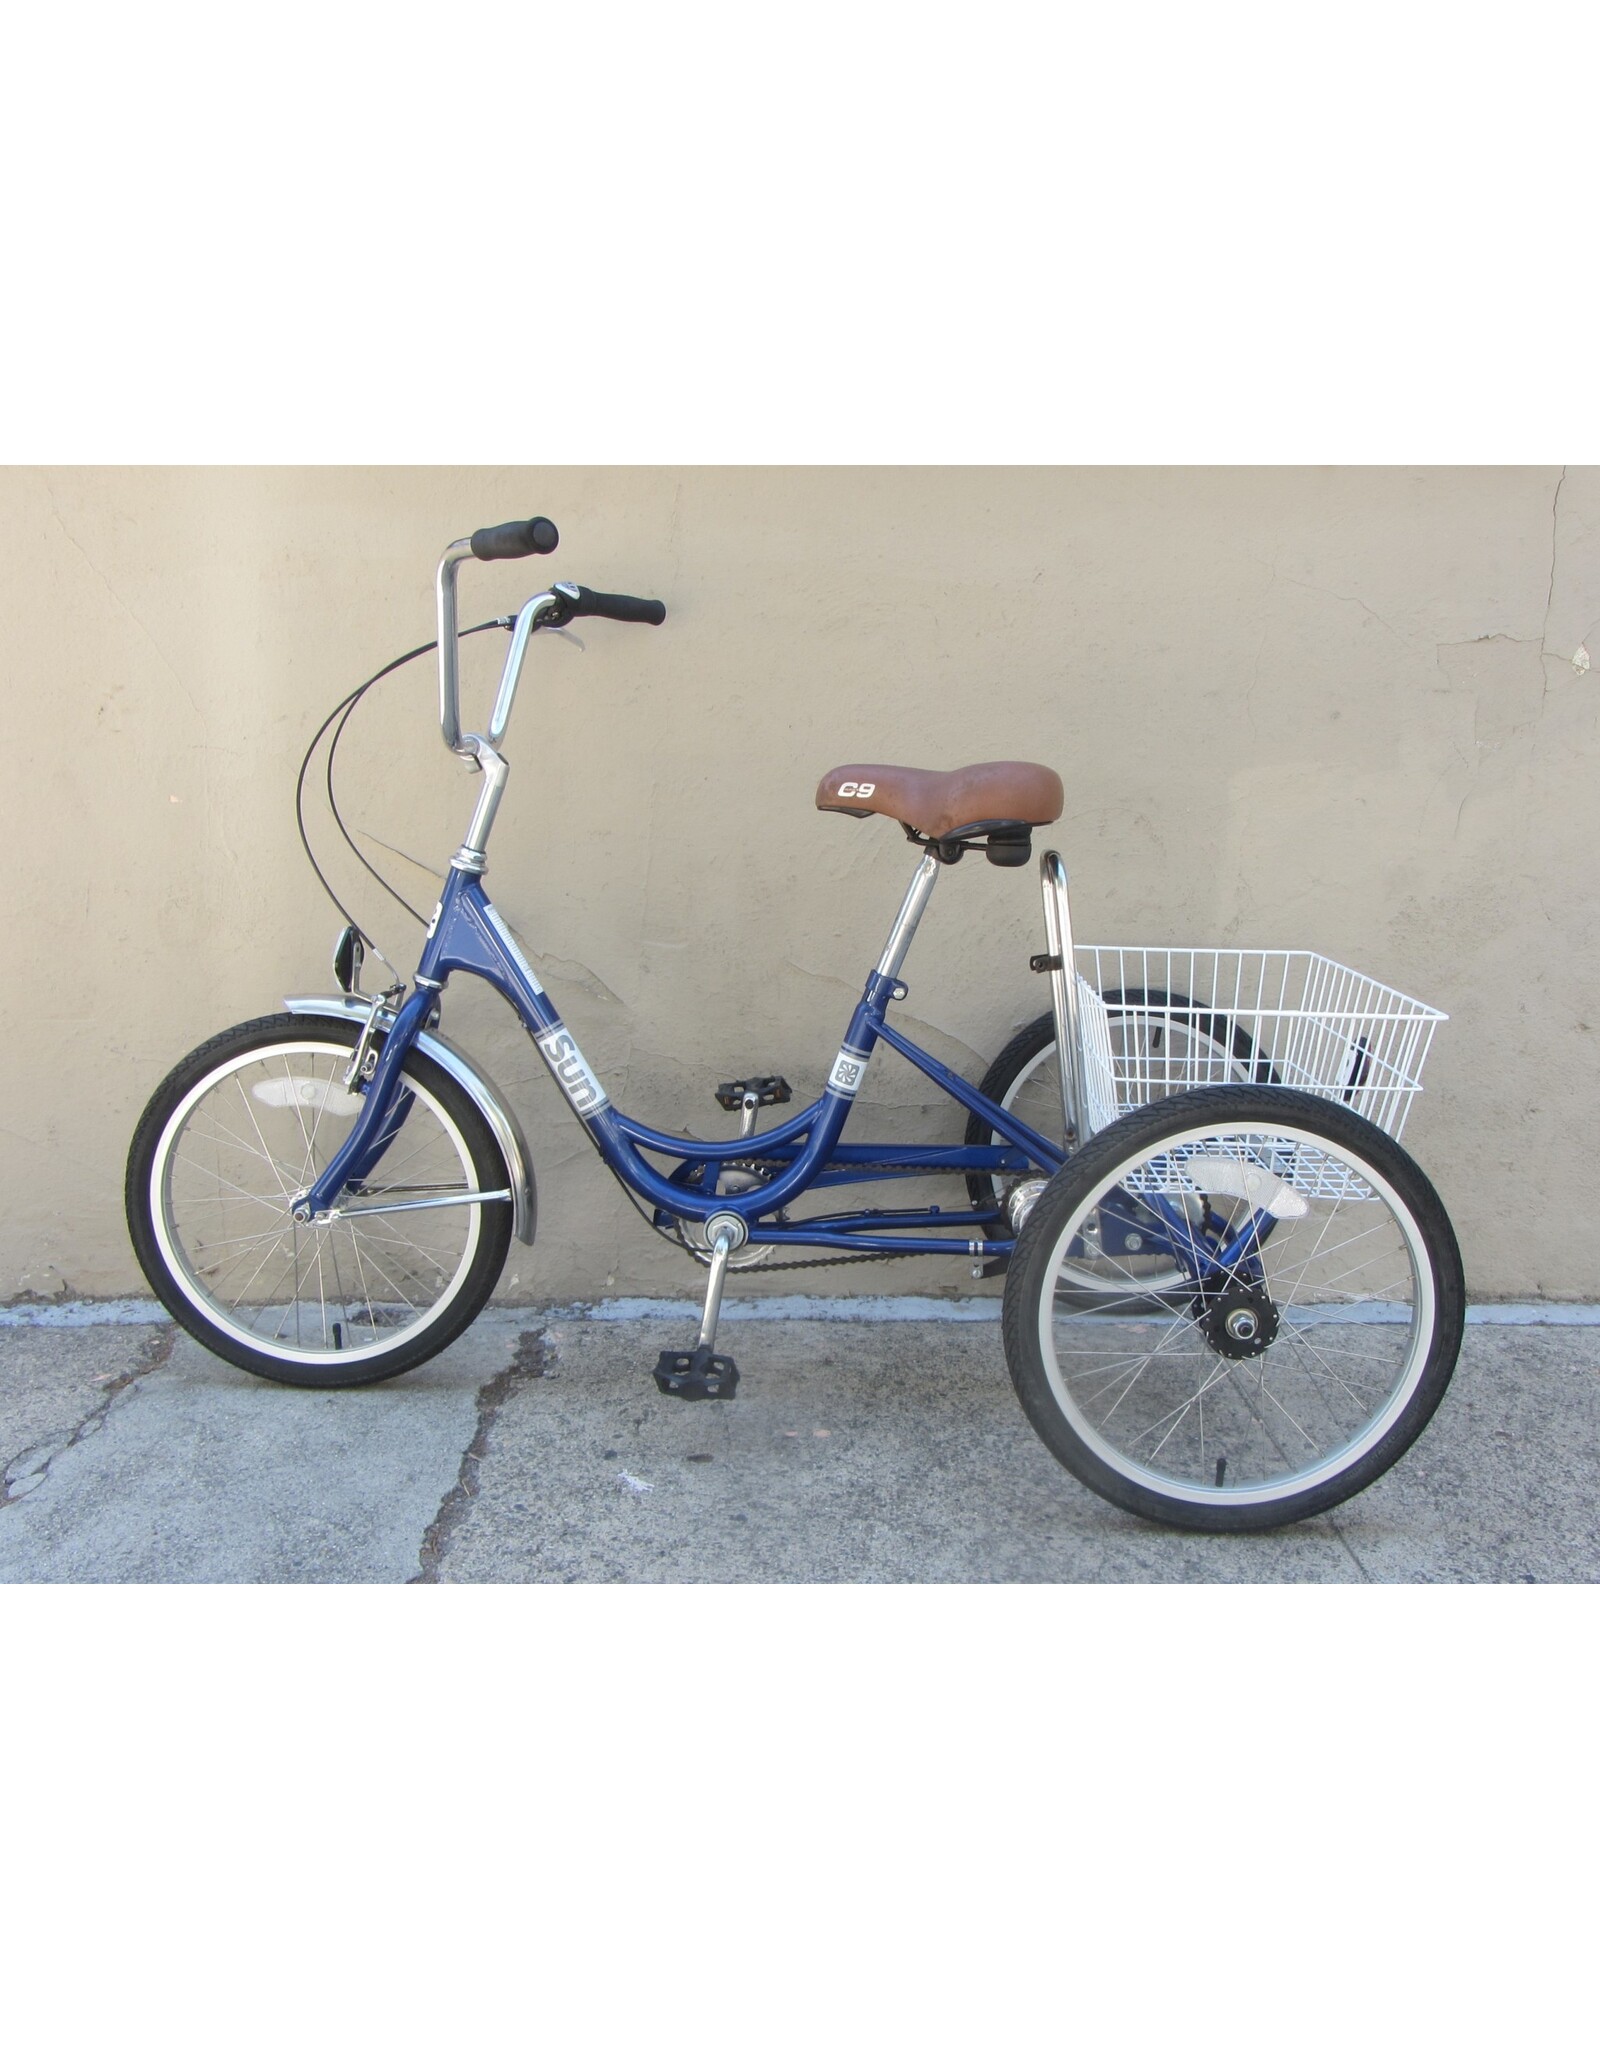 SUN BICYCLES Sun Traditional, 15 Inches,2019, Blue